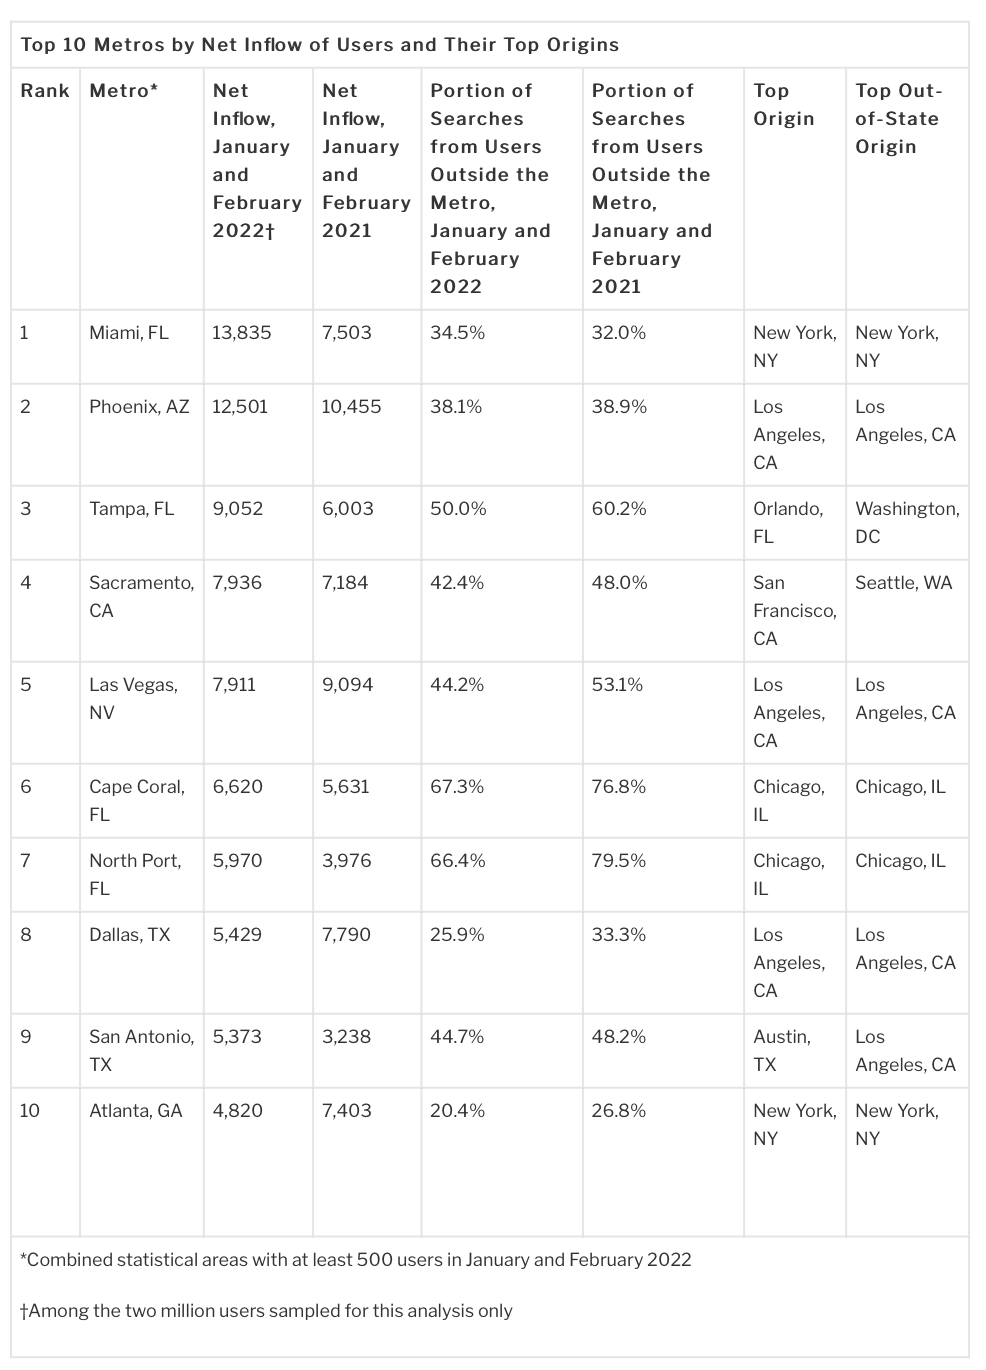 A table showing the top 10 metros by inflow of movers and where those movers are coming from.